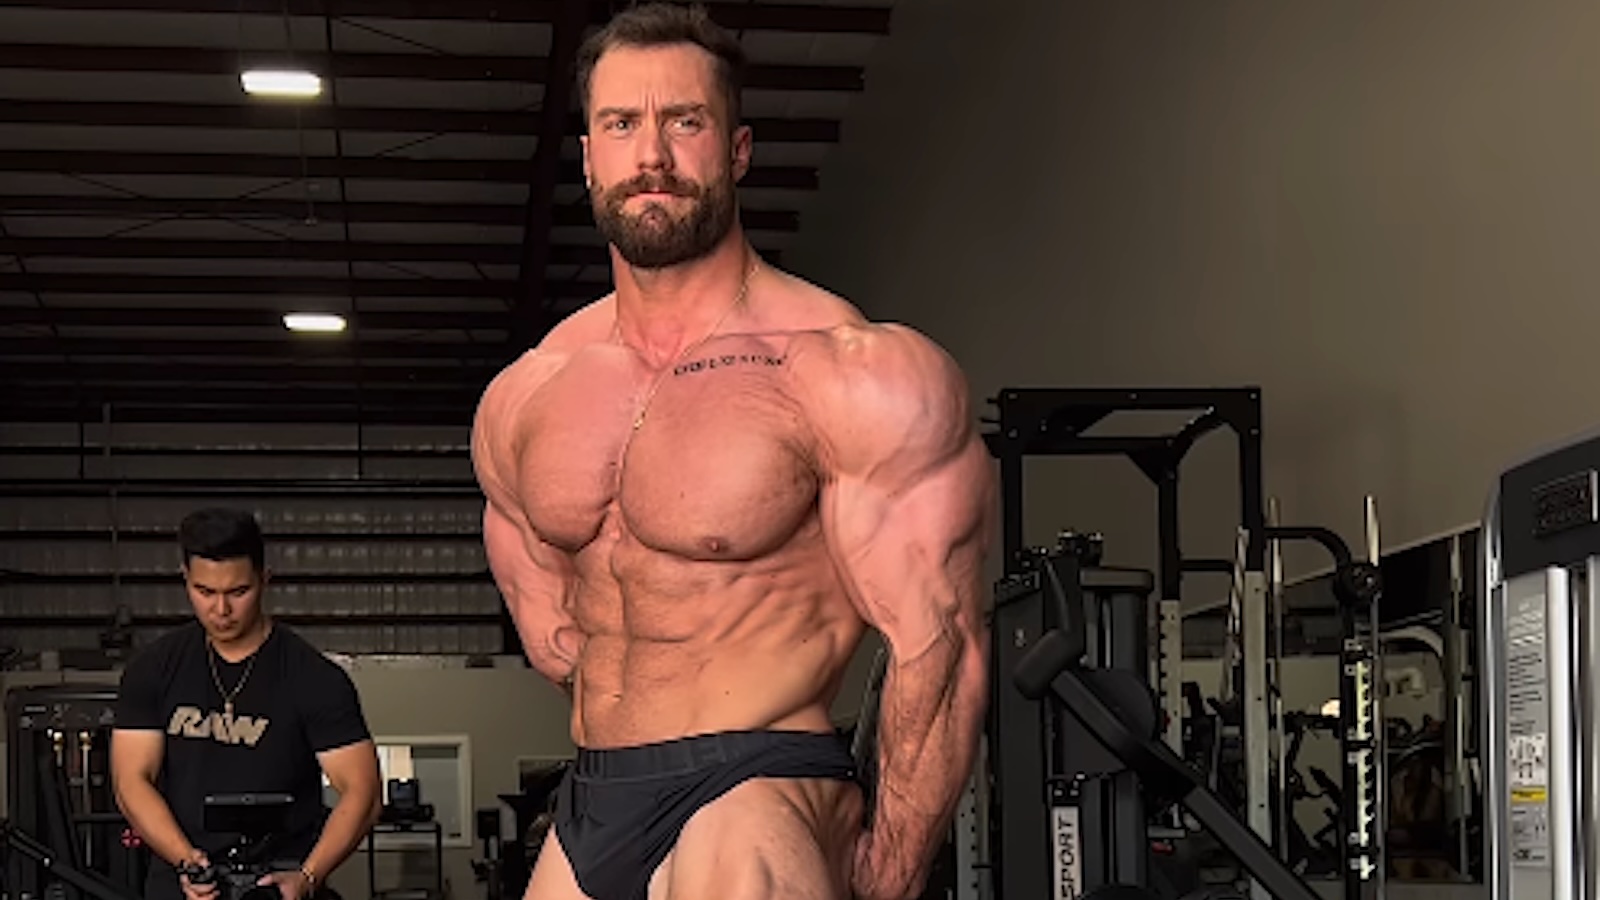 Detriment Your Bodybuilding Career”: Chris Bumstead, Who Himself Has a  Forearm Tattoo, Once Warned Bodybuilders Not to Have Them -  EssentiallySports